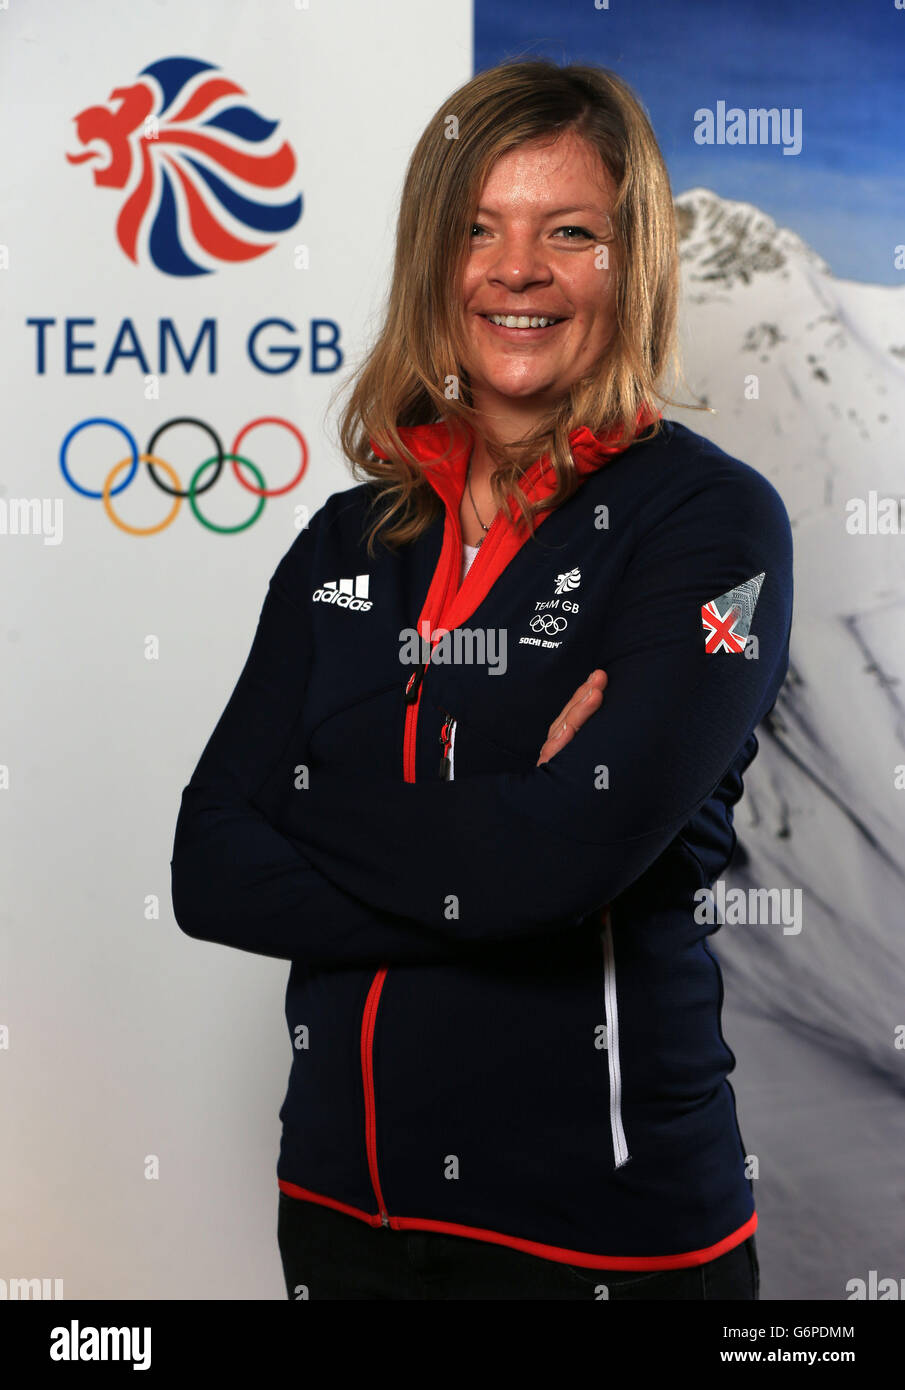 Emma Lonsdale during the Team GB kitting session at the adidas Centre, Stockport. Stock Photo